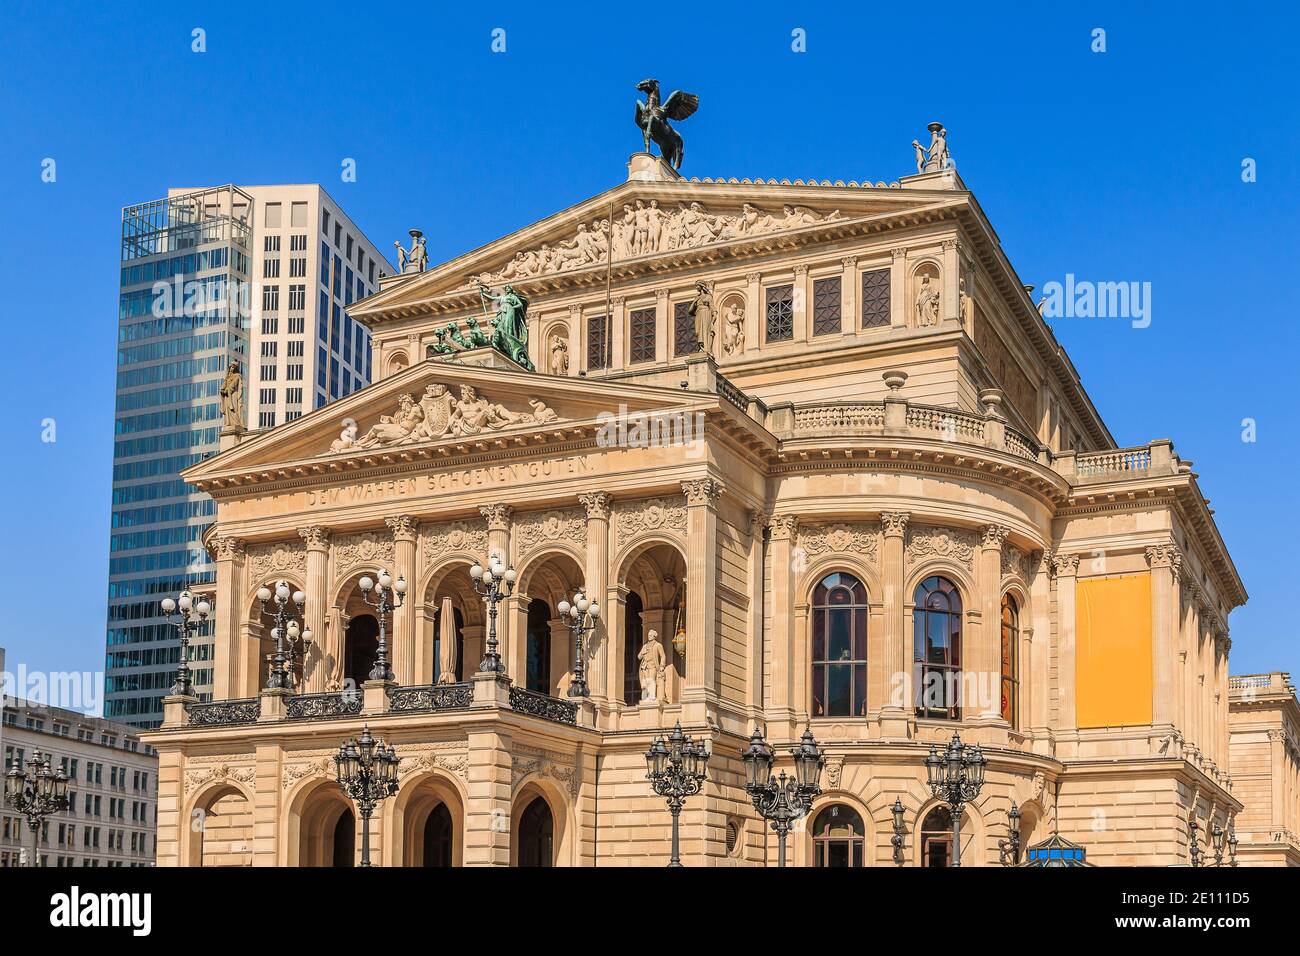 Historic building of the old opera house in Frankfurt in springtime with sunshine. Public square in the center of the city with street lamps in front Stock Photo